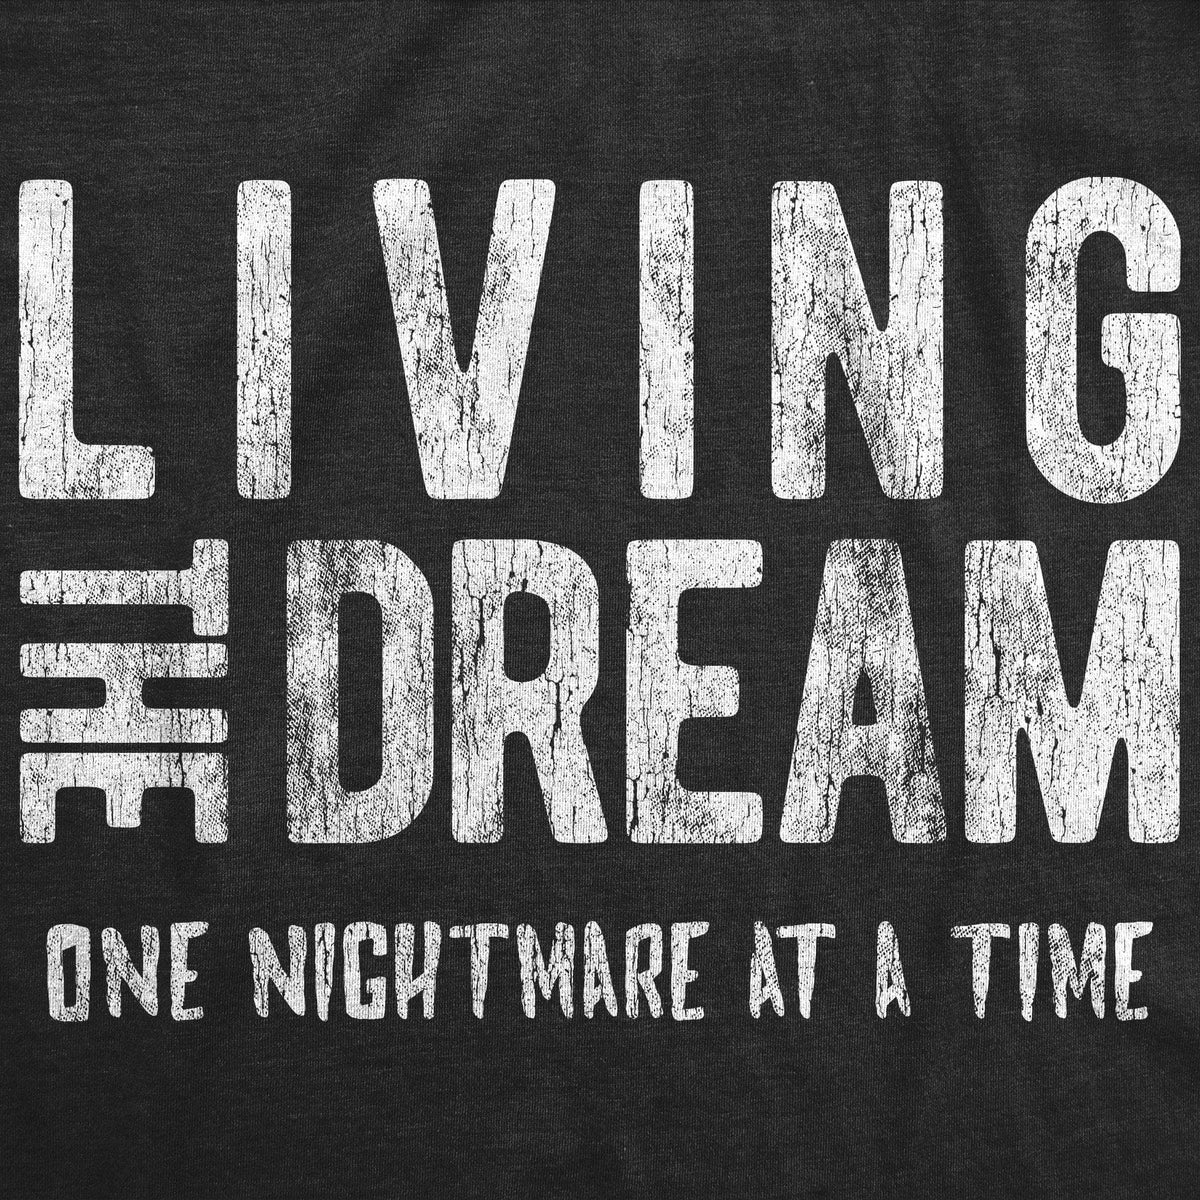 Living The Dream One Nightmare At A Time Women&#39;s Tshirt - Crazy Dog T-Shirts